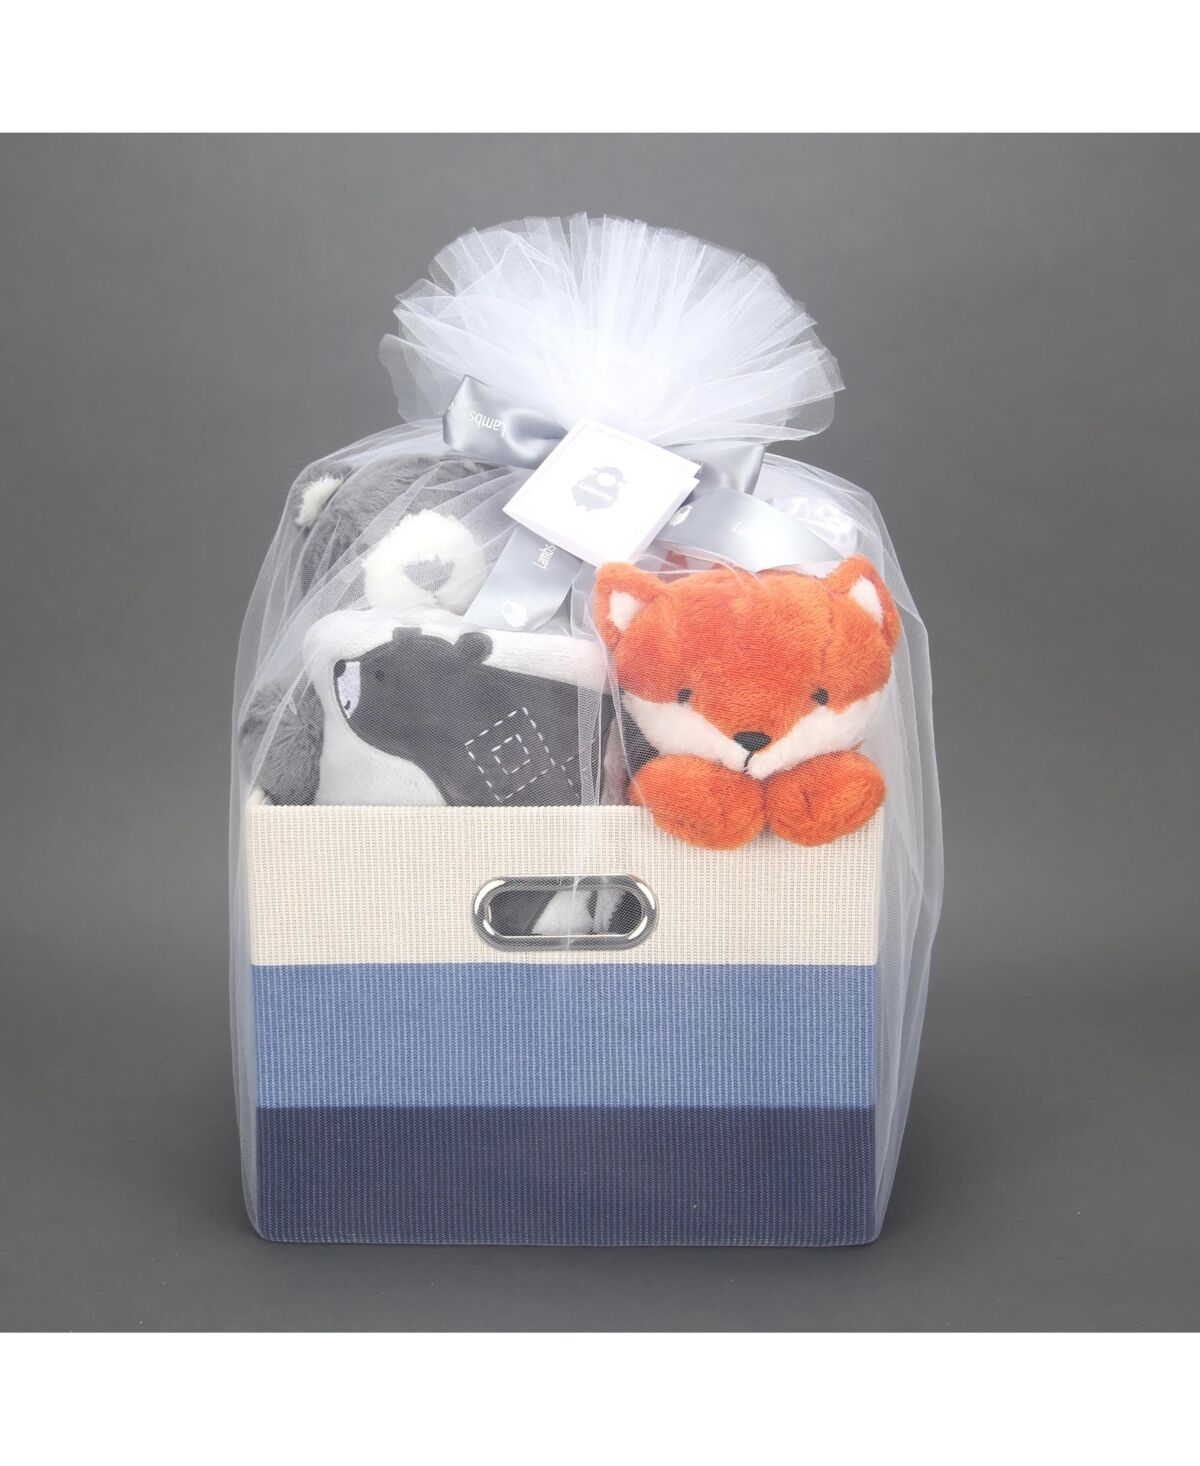 Lambs & Ivy Blue 5-Piece Baby Gift Basket for Baby Shower/Newborn Welcome Home - Multicolor